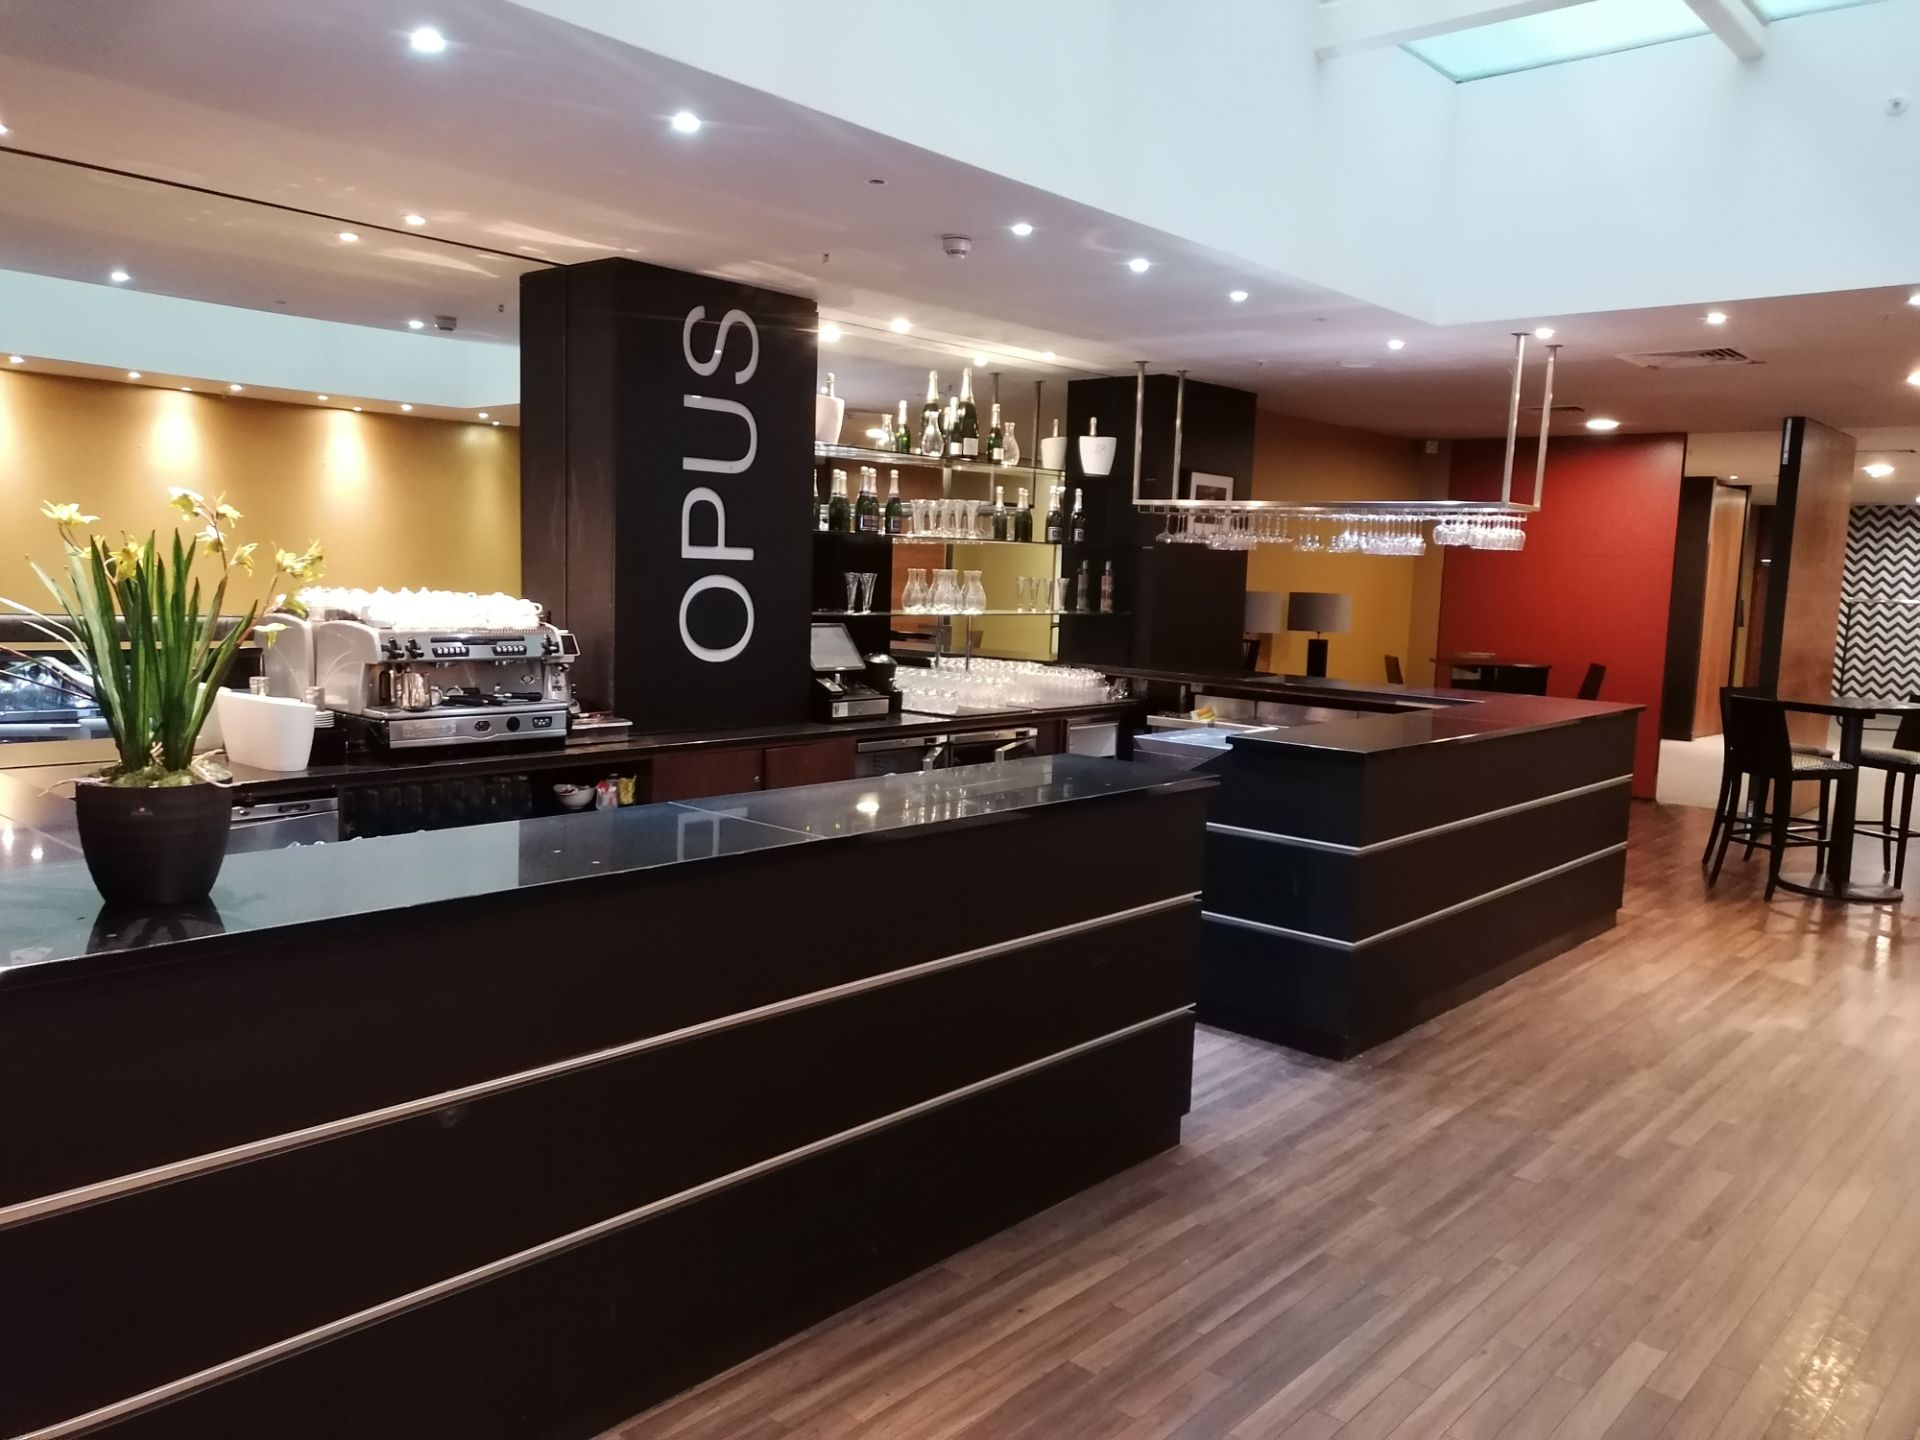 promotional images of opus resturant and kitchen - Image 2 of 7